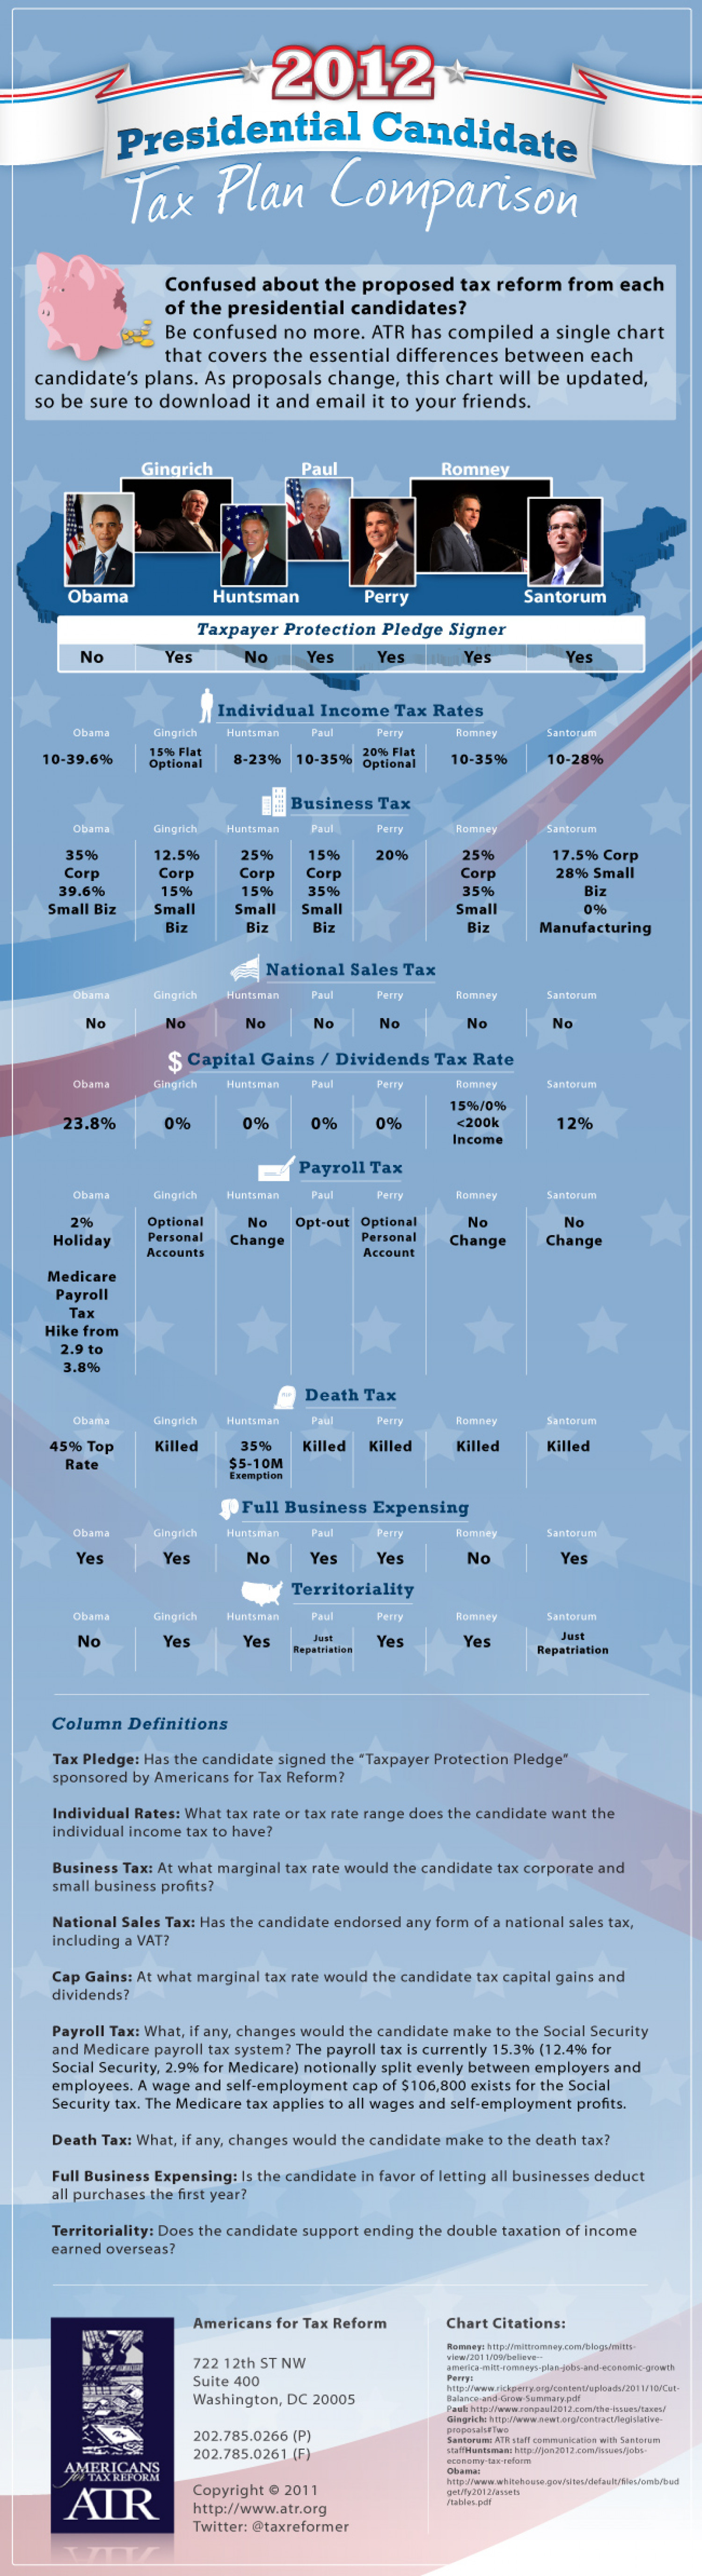 Tax Plans of the Presidential Candidates Infographic